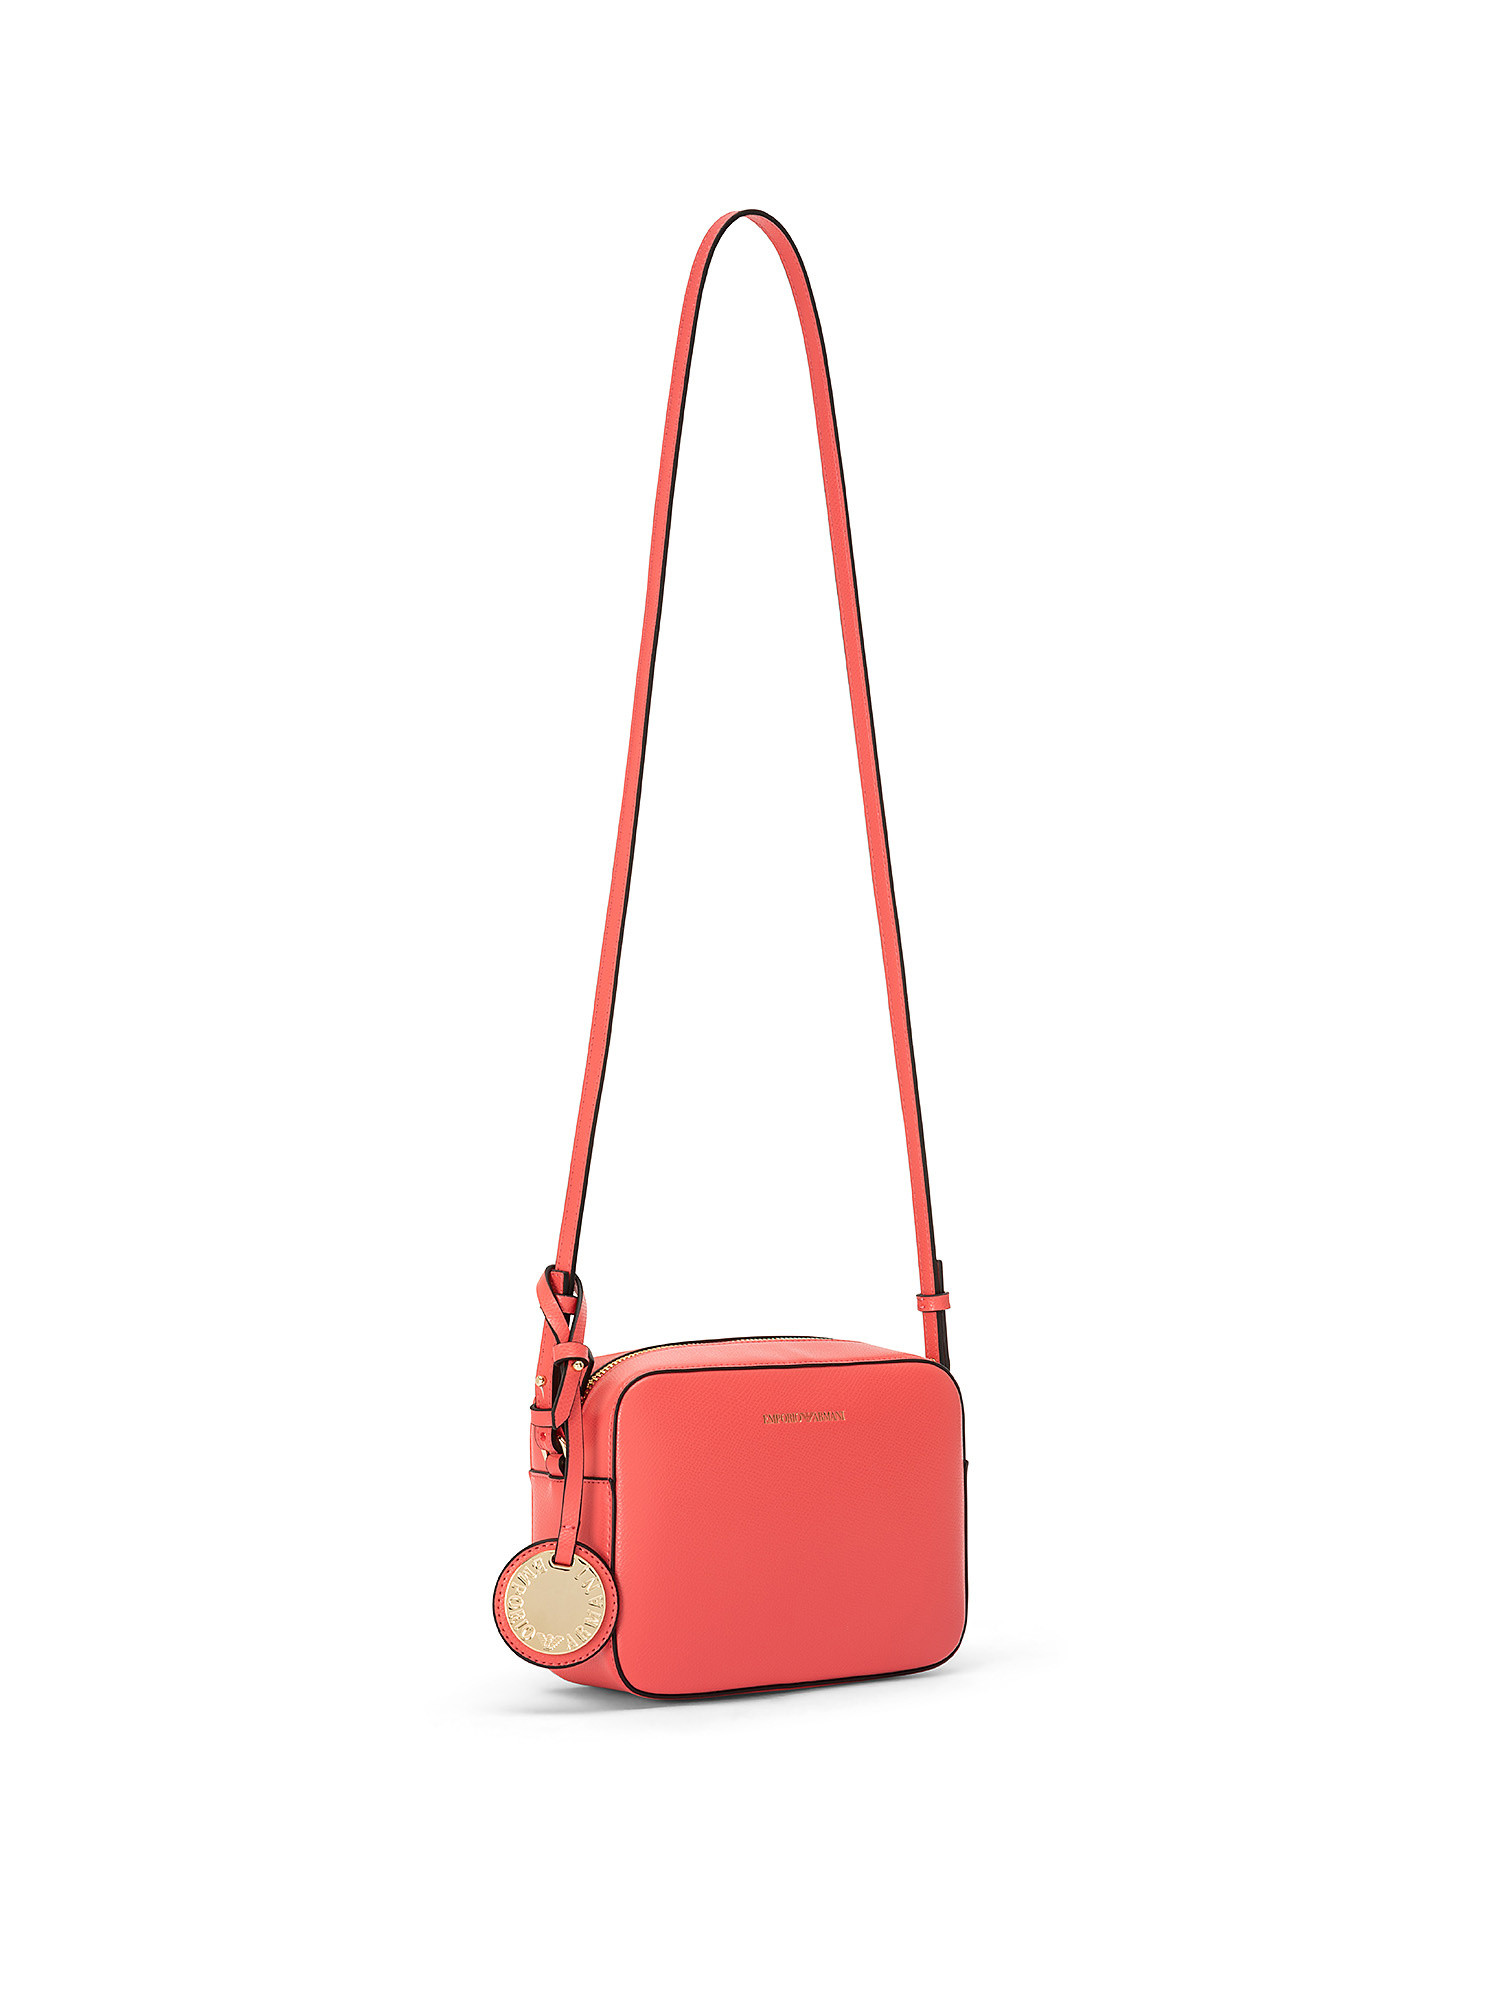 Mini bag, Rosso corallo, large image number 1